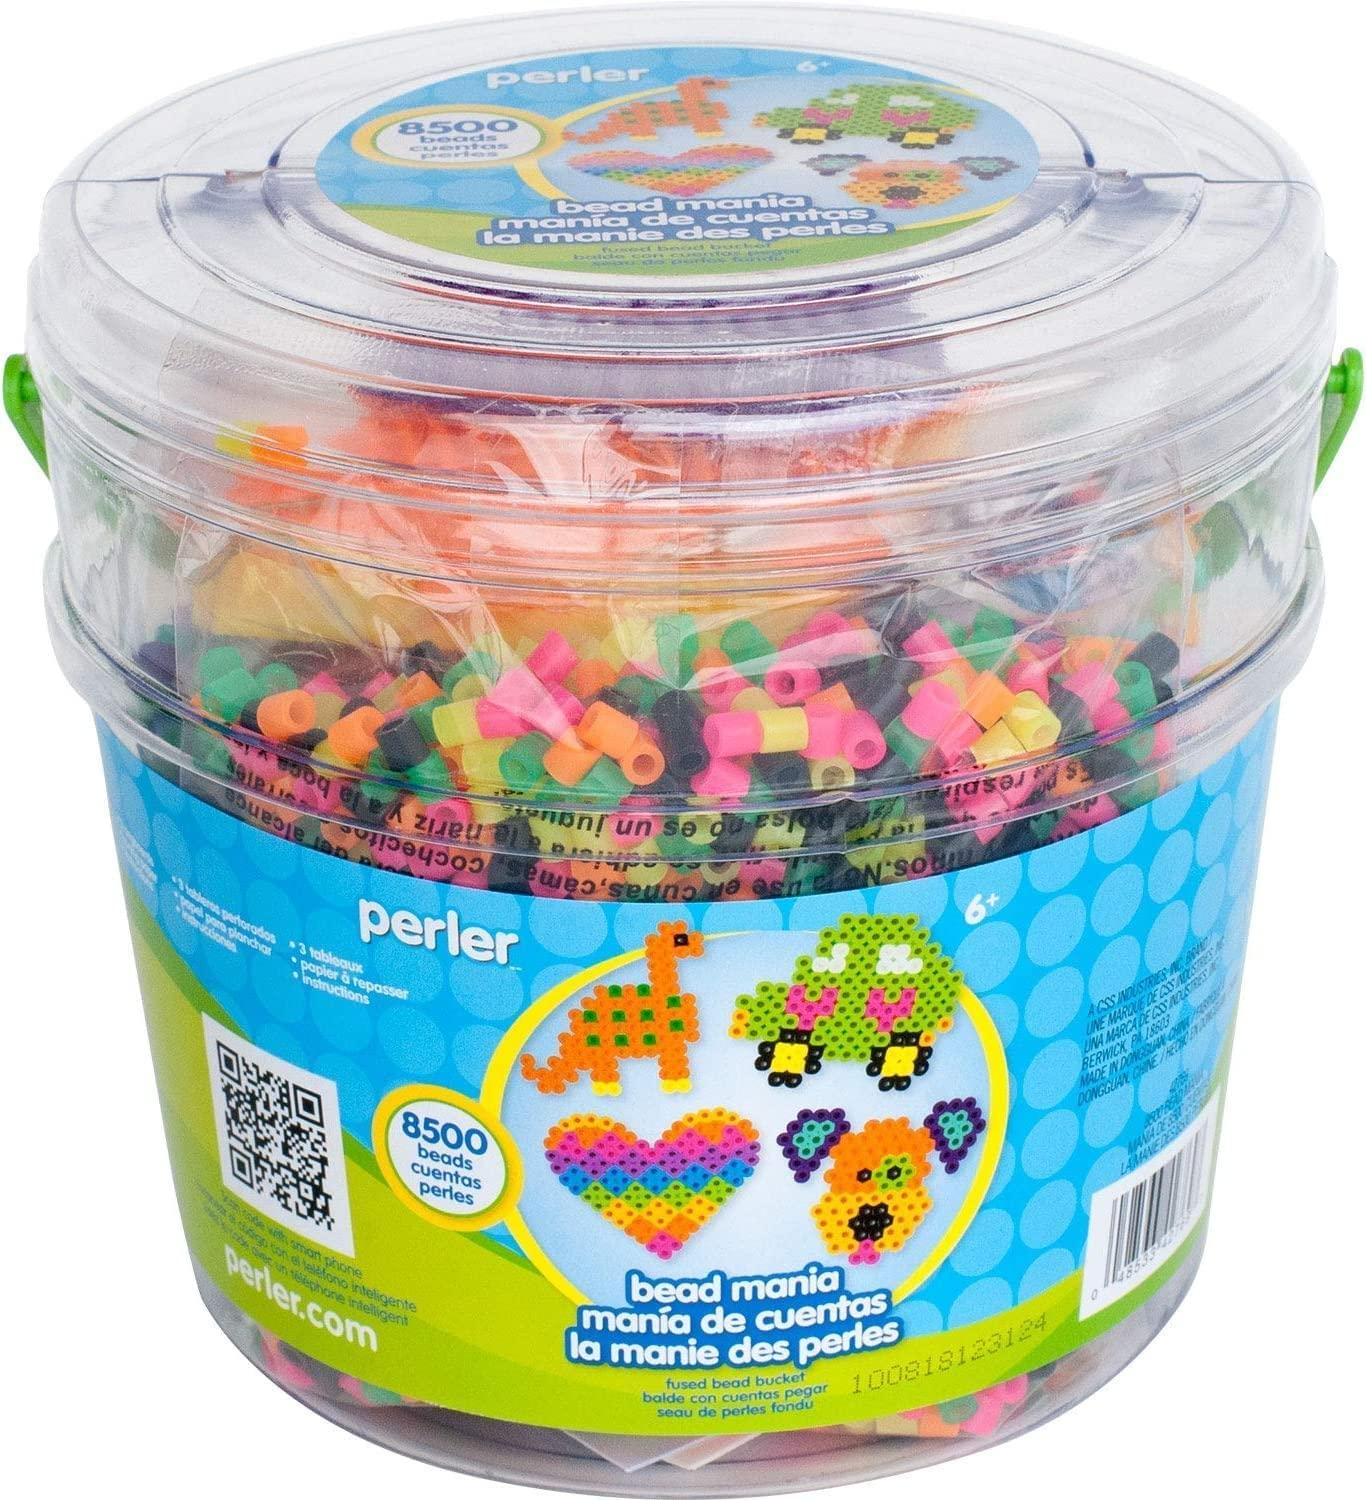 Perler Fuse Activity Bucket for Arts and Crafts, 8500 Beads, One Size,  Multicolor